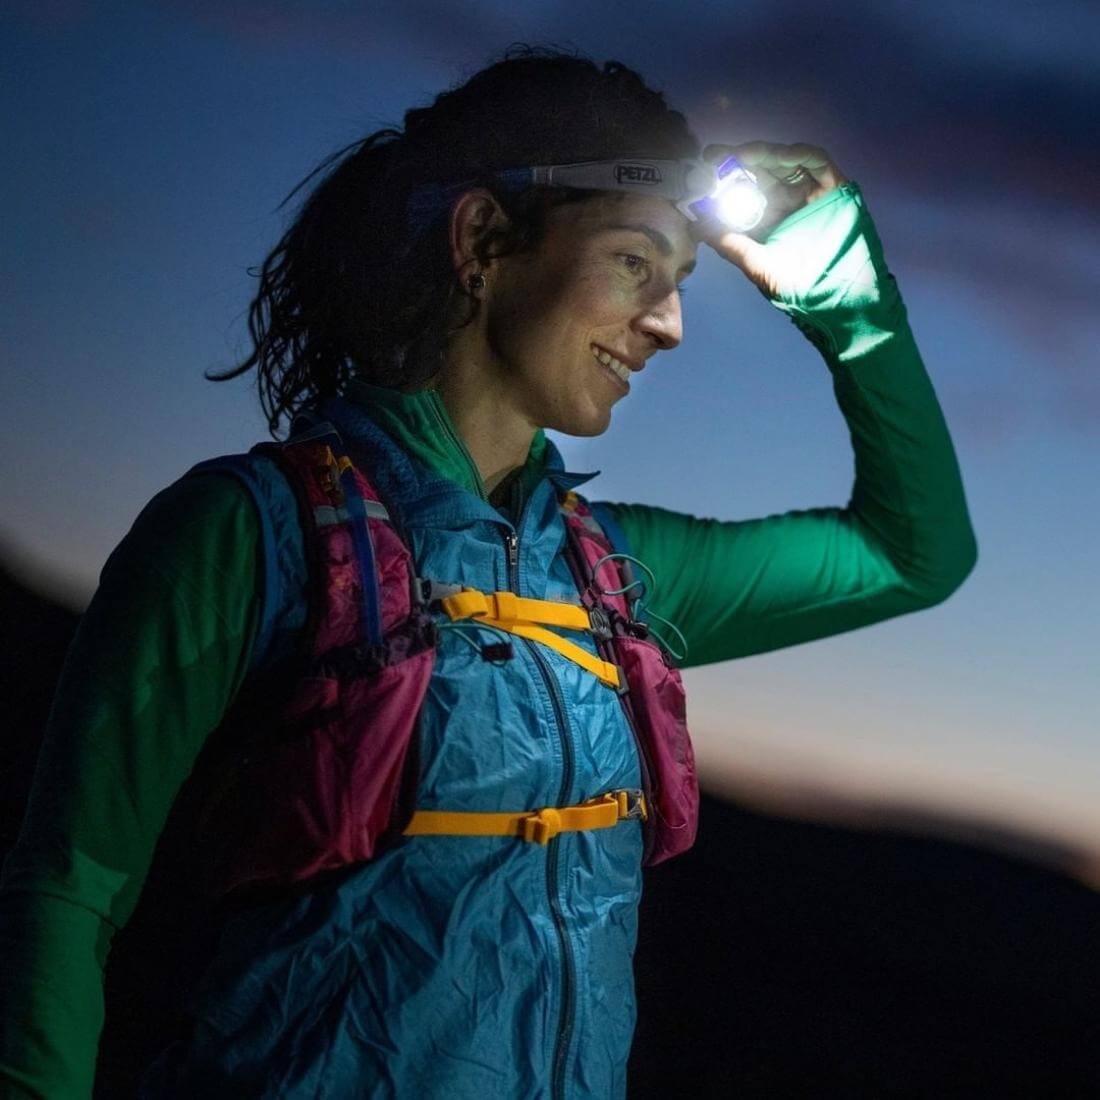 Shop Petzl Running Headlamps. The ultimate in sports and running lights and headlamps